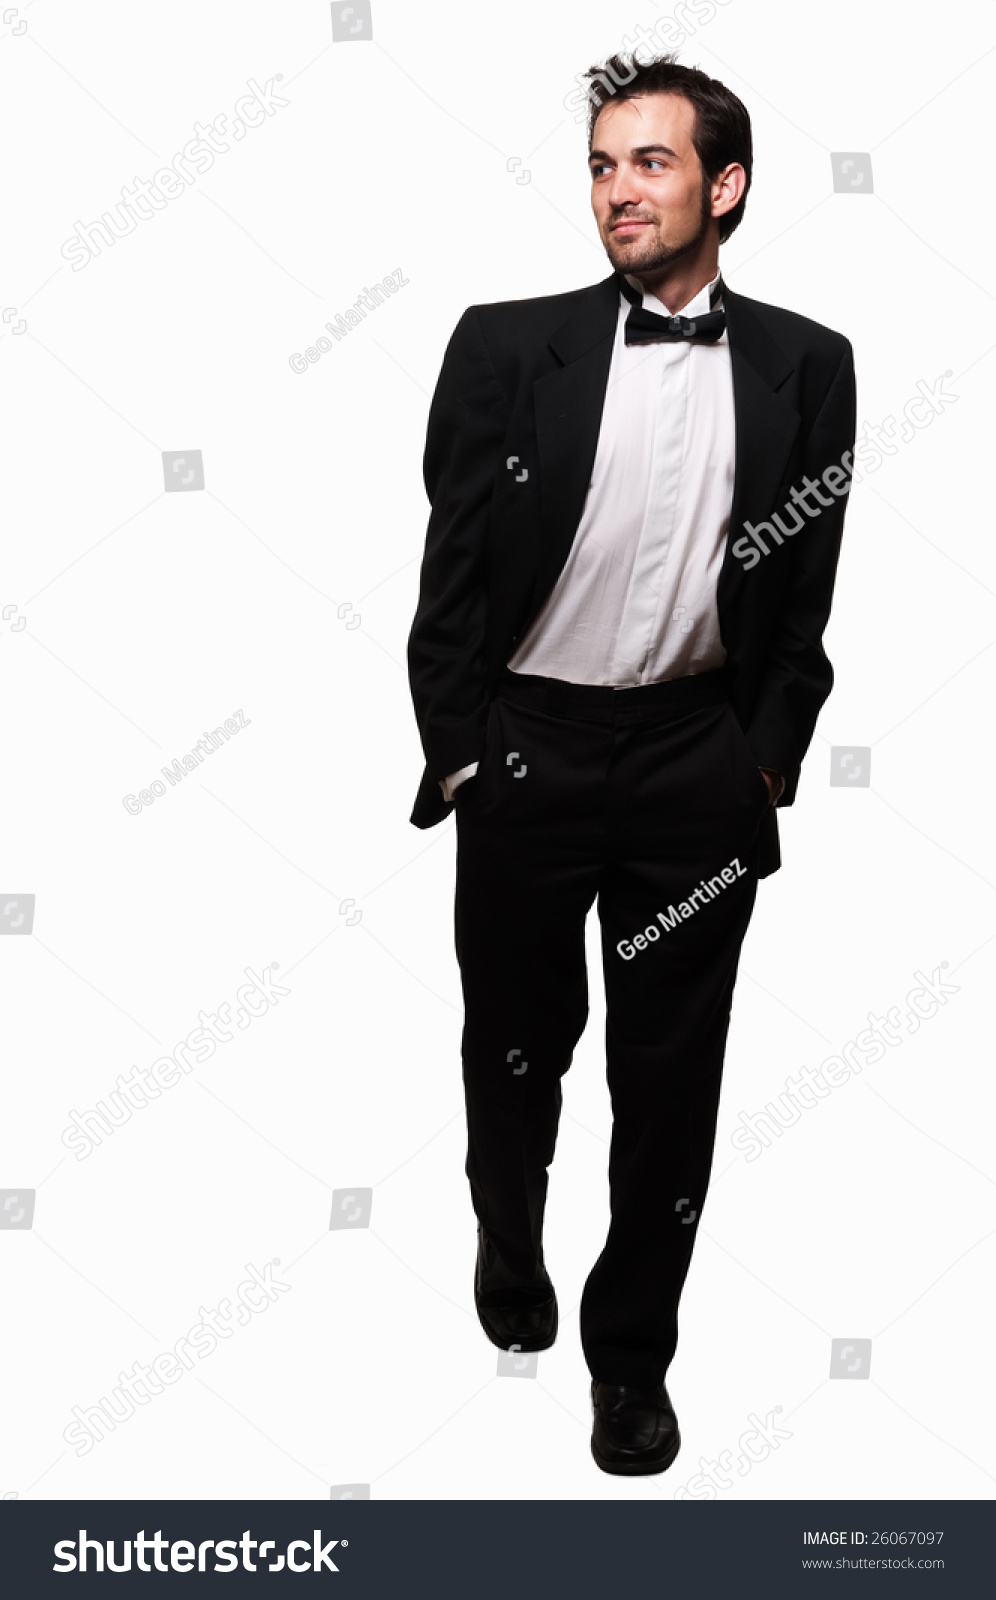 Full Body Of An Attractive Young Brunette Man With A Beard Wearing A ...